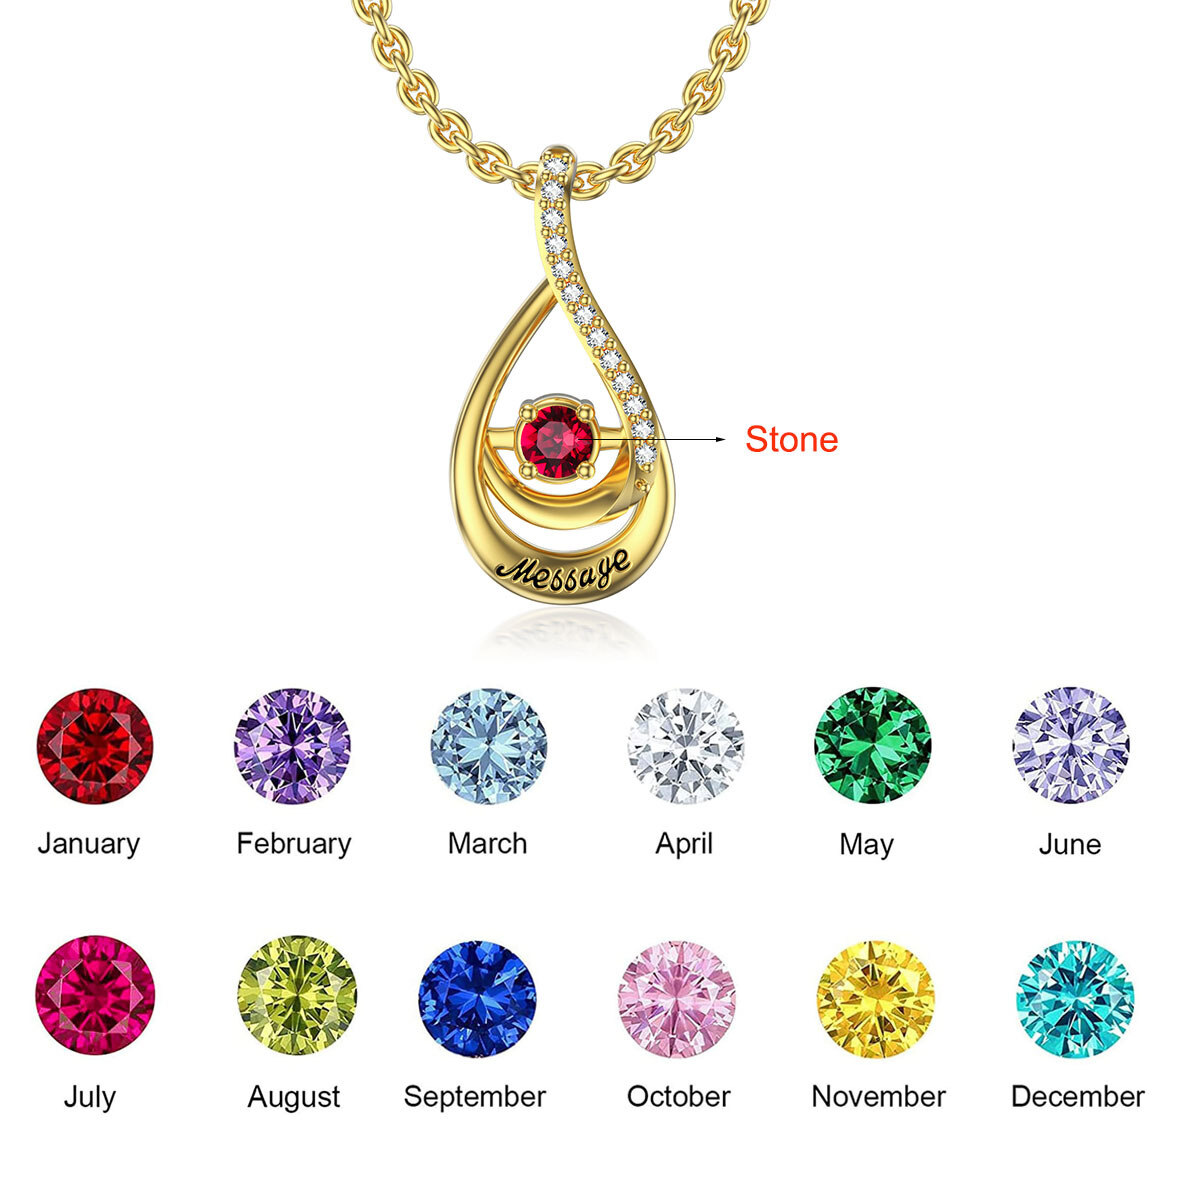 10K Gold Heart Shaped Cubic Zirconia Personalized Birthstone Pendant Necklace-6